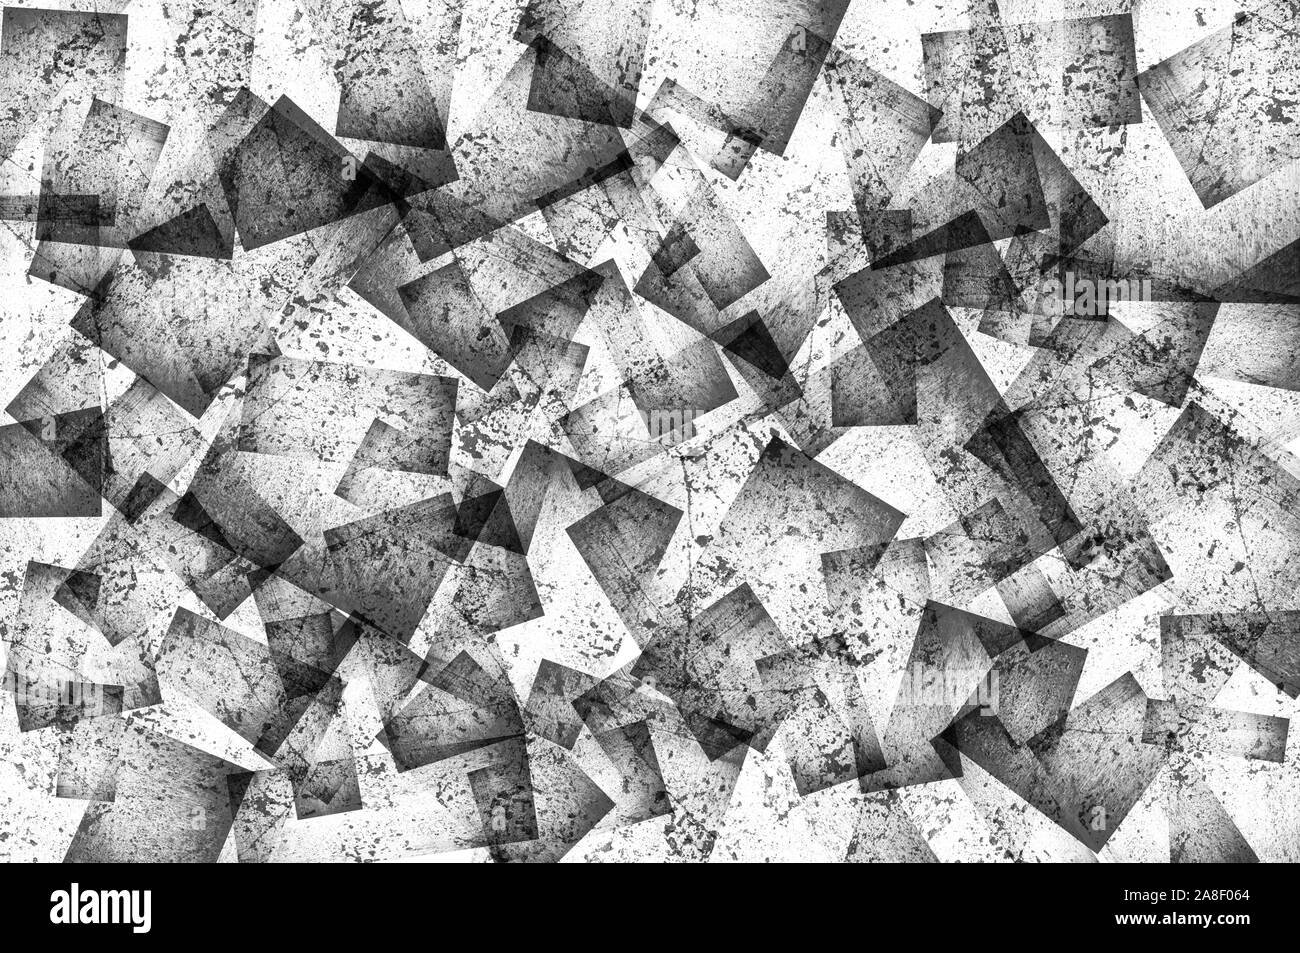 Abstract black and white grunge background textured with rectangles Stock Photo